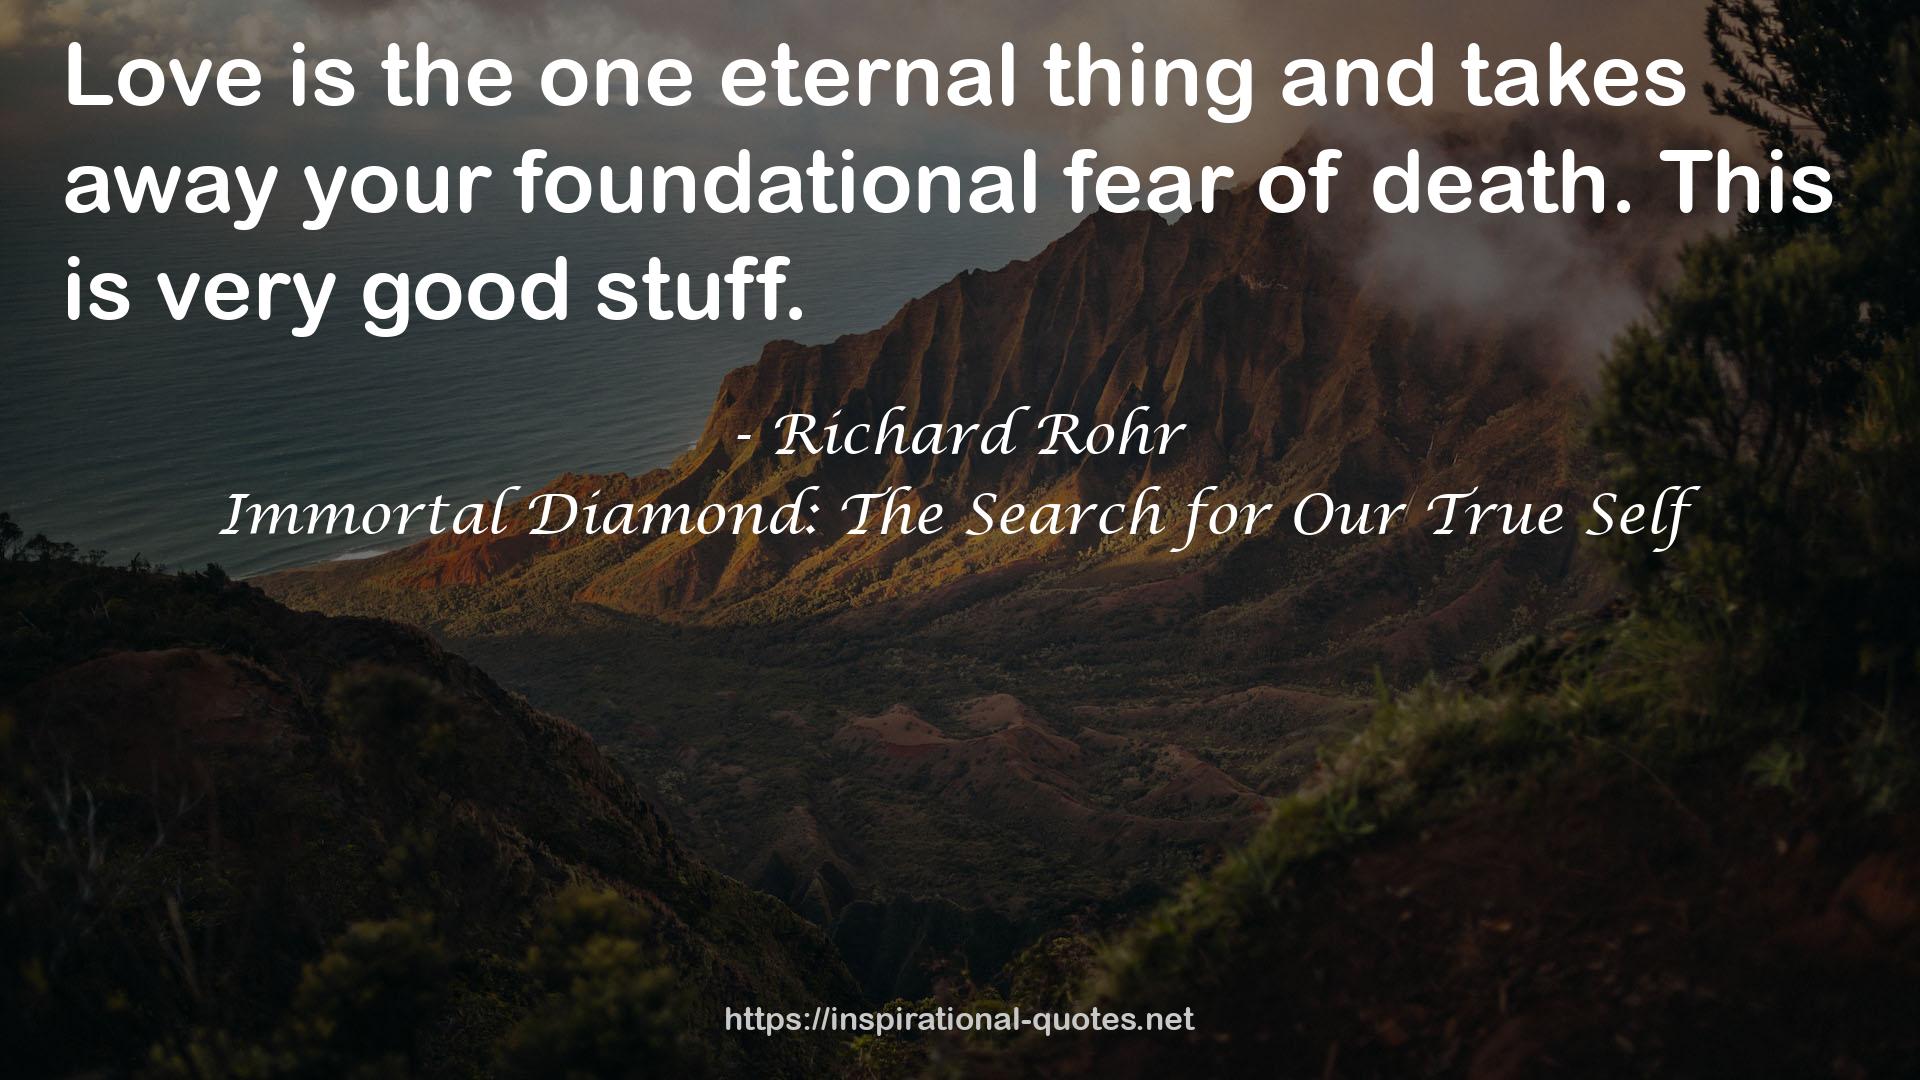 Immortal Diamond: The Search for Our True Self QUOTES